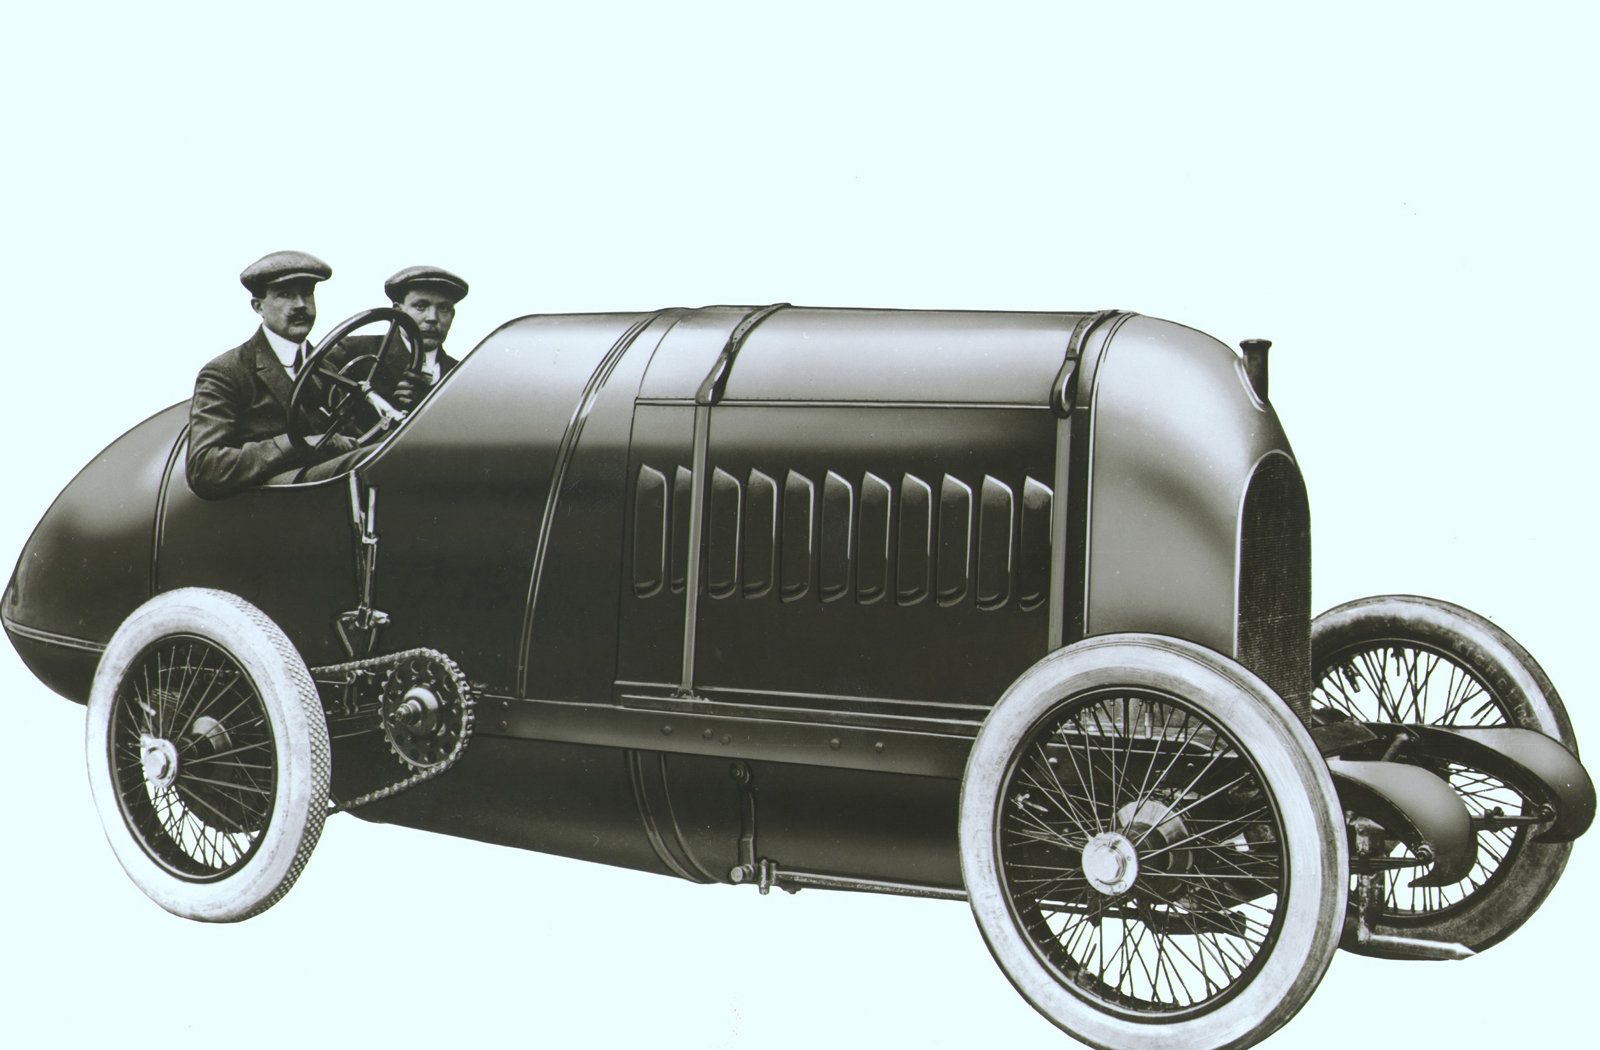 Meet The Beast Of Turin A 111 Year Old Fiat With A Monstrous 28 4 Liter Engine Autoevolution